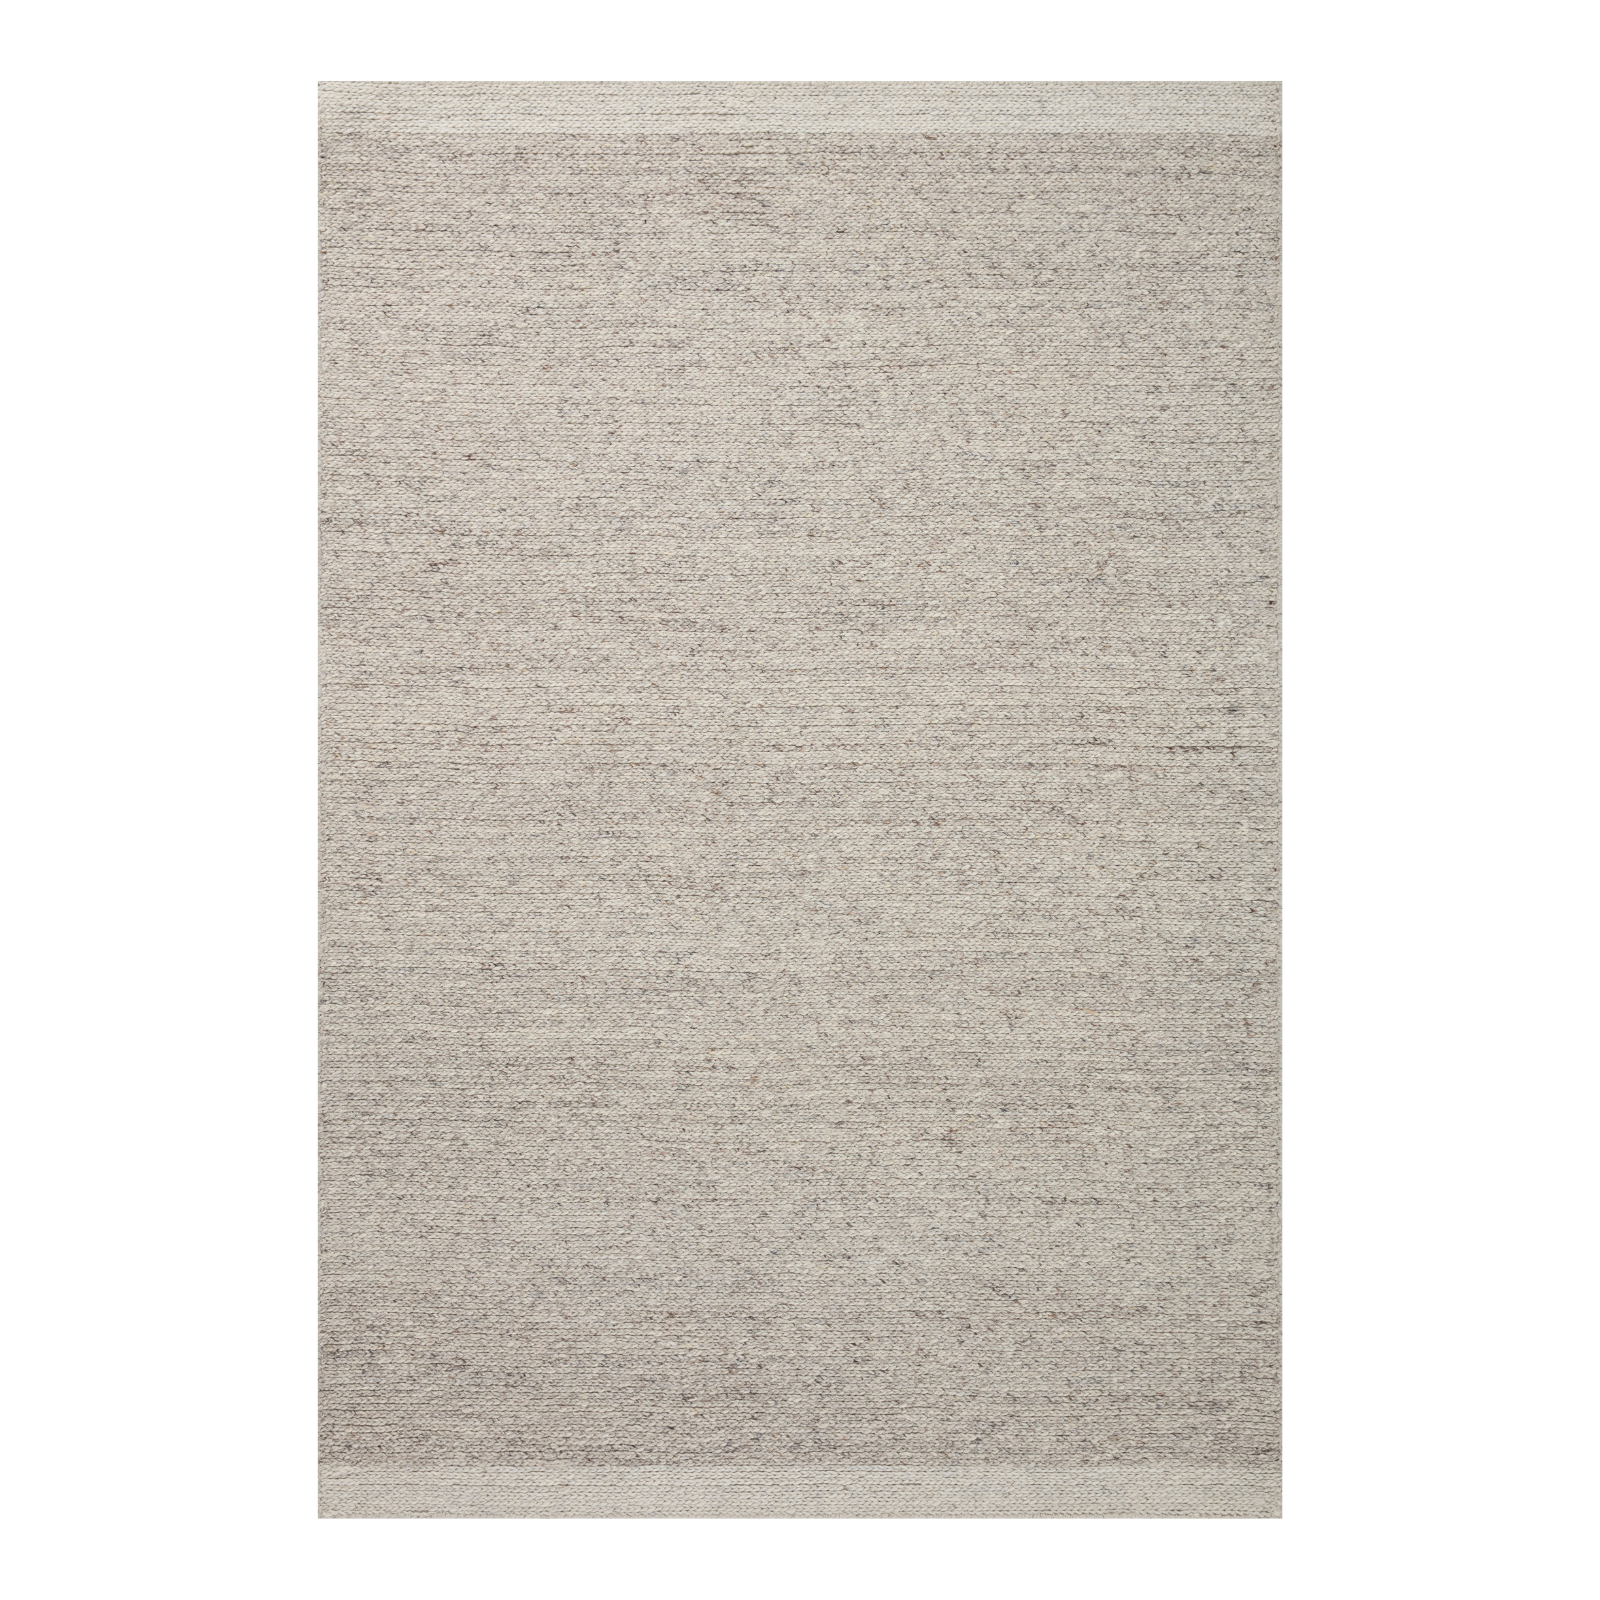 Magnolia Home by Joanna Gaines x Loloi Ashby Silver / Ivory Rug